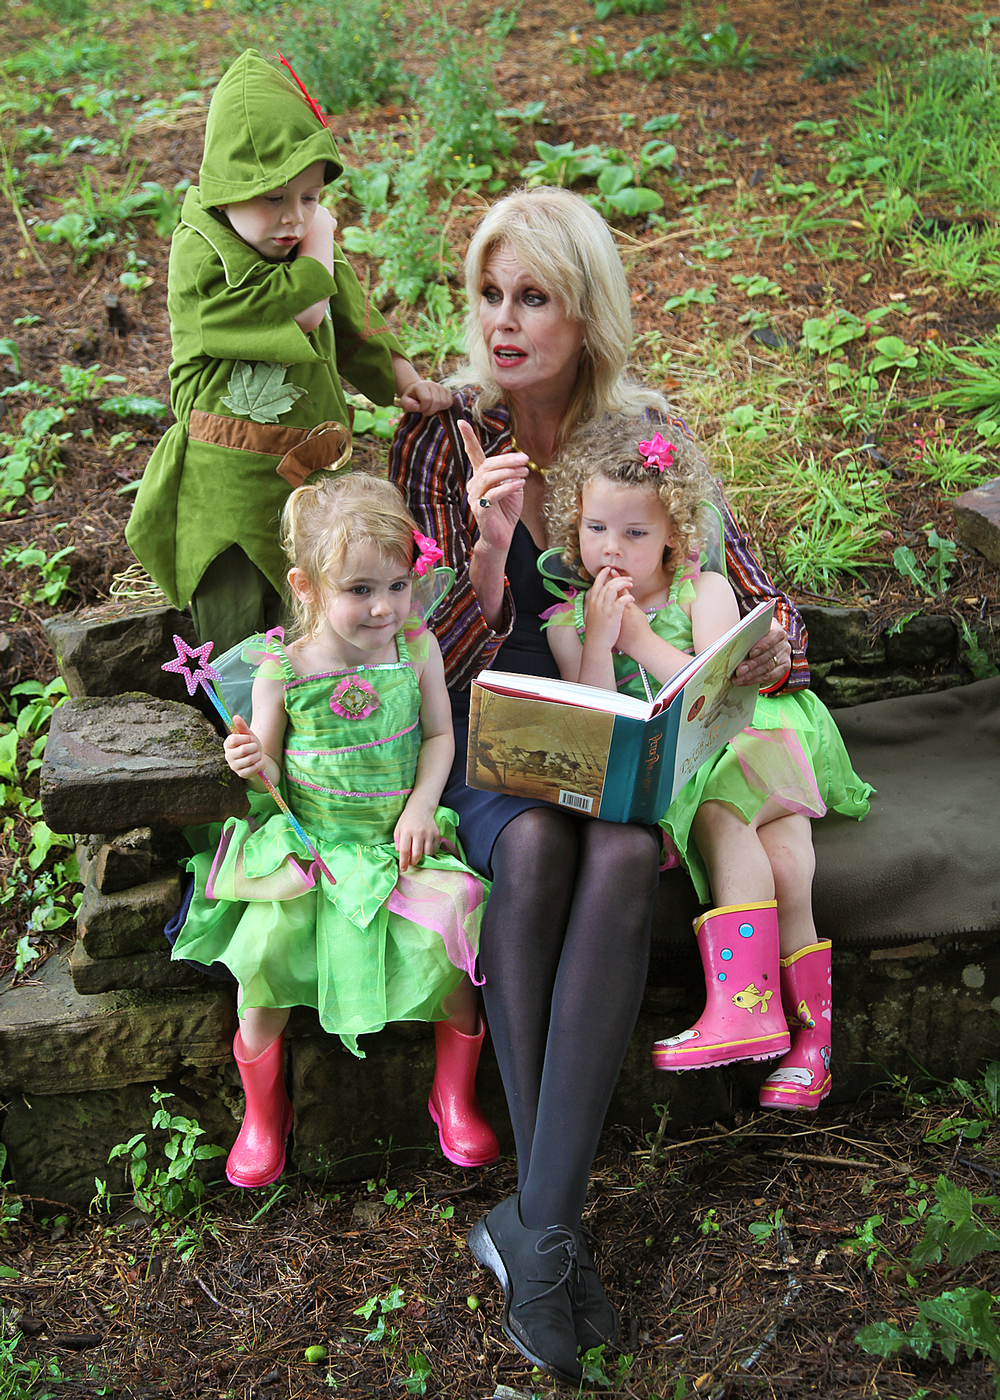 Lumley was named patron of the Peter Pan Moat Brae Trust when it was formed in 2009